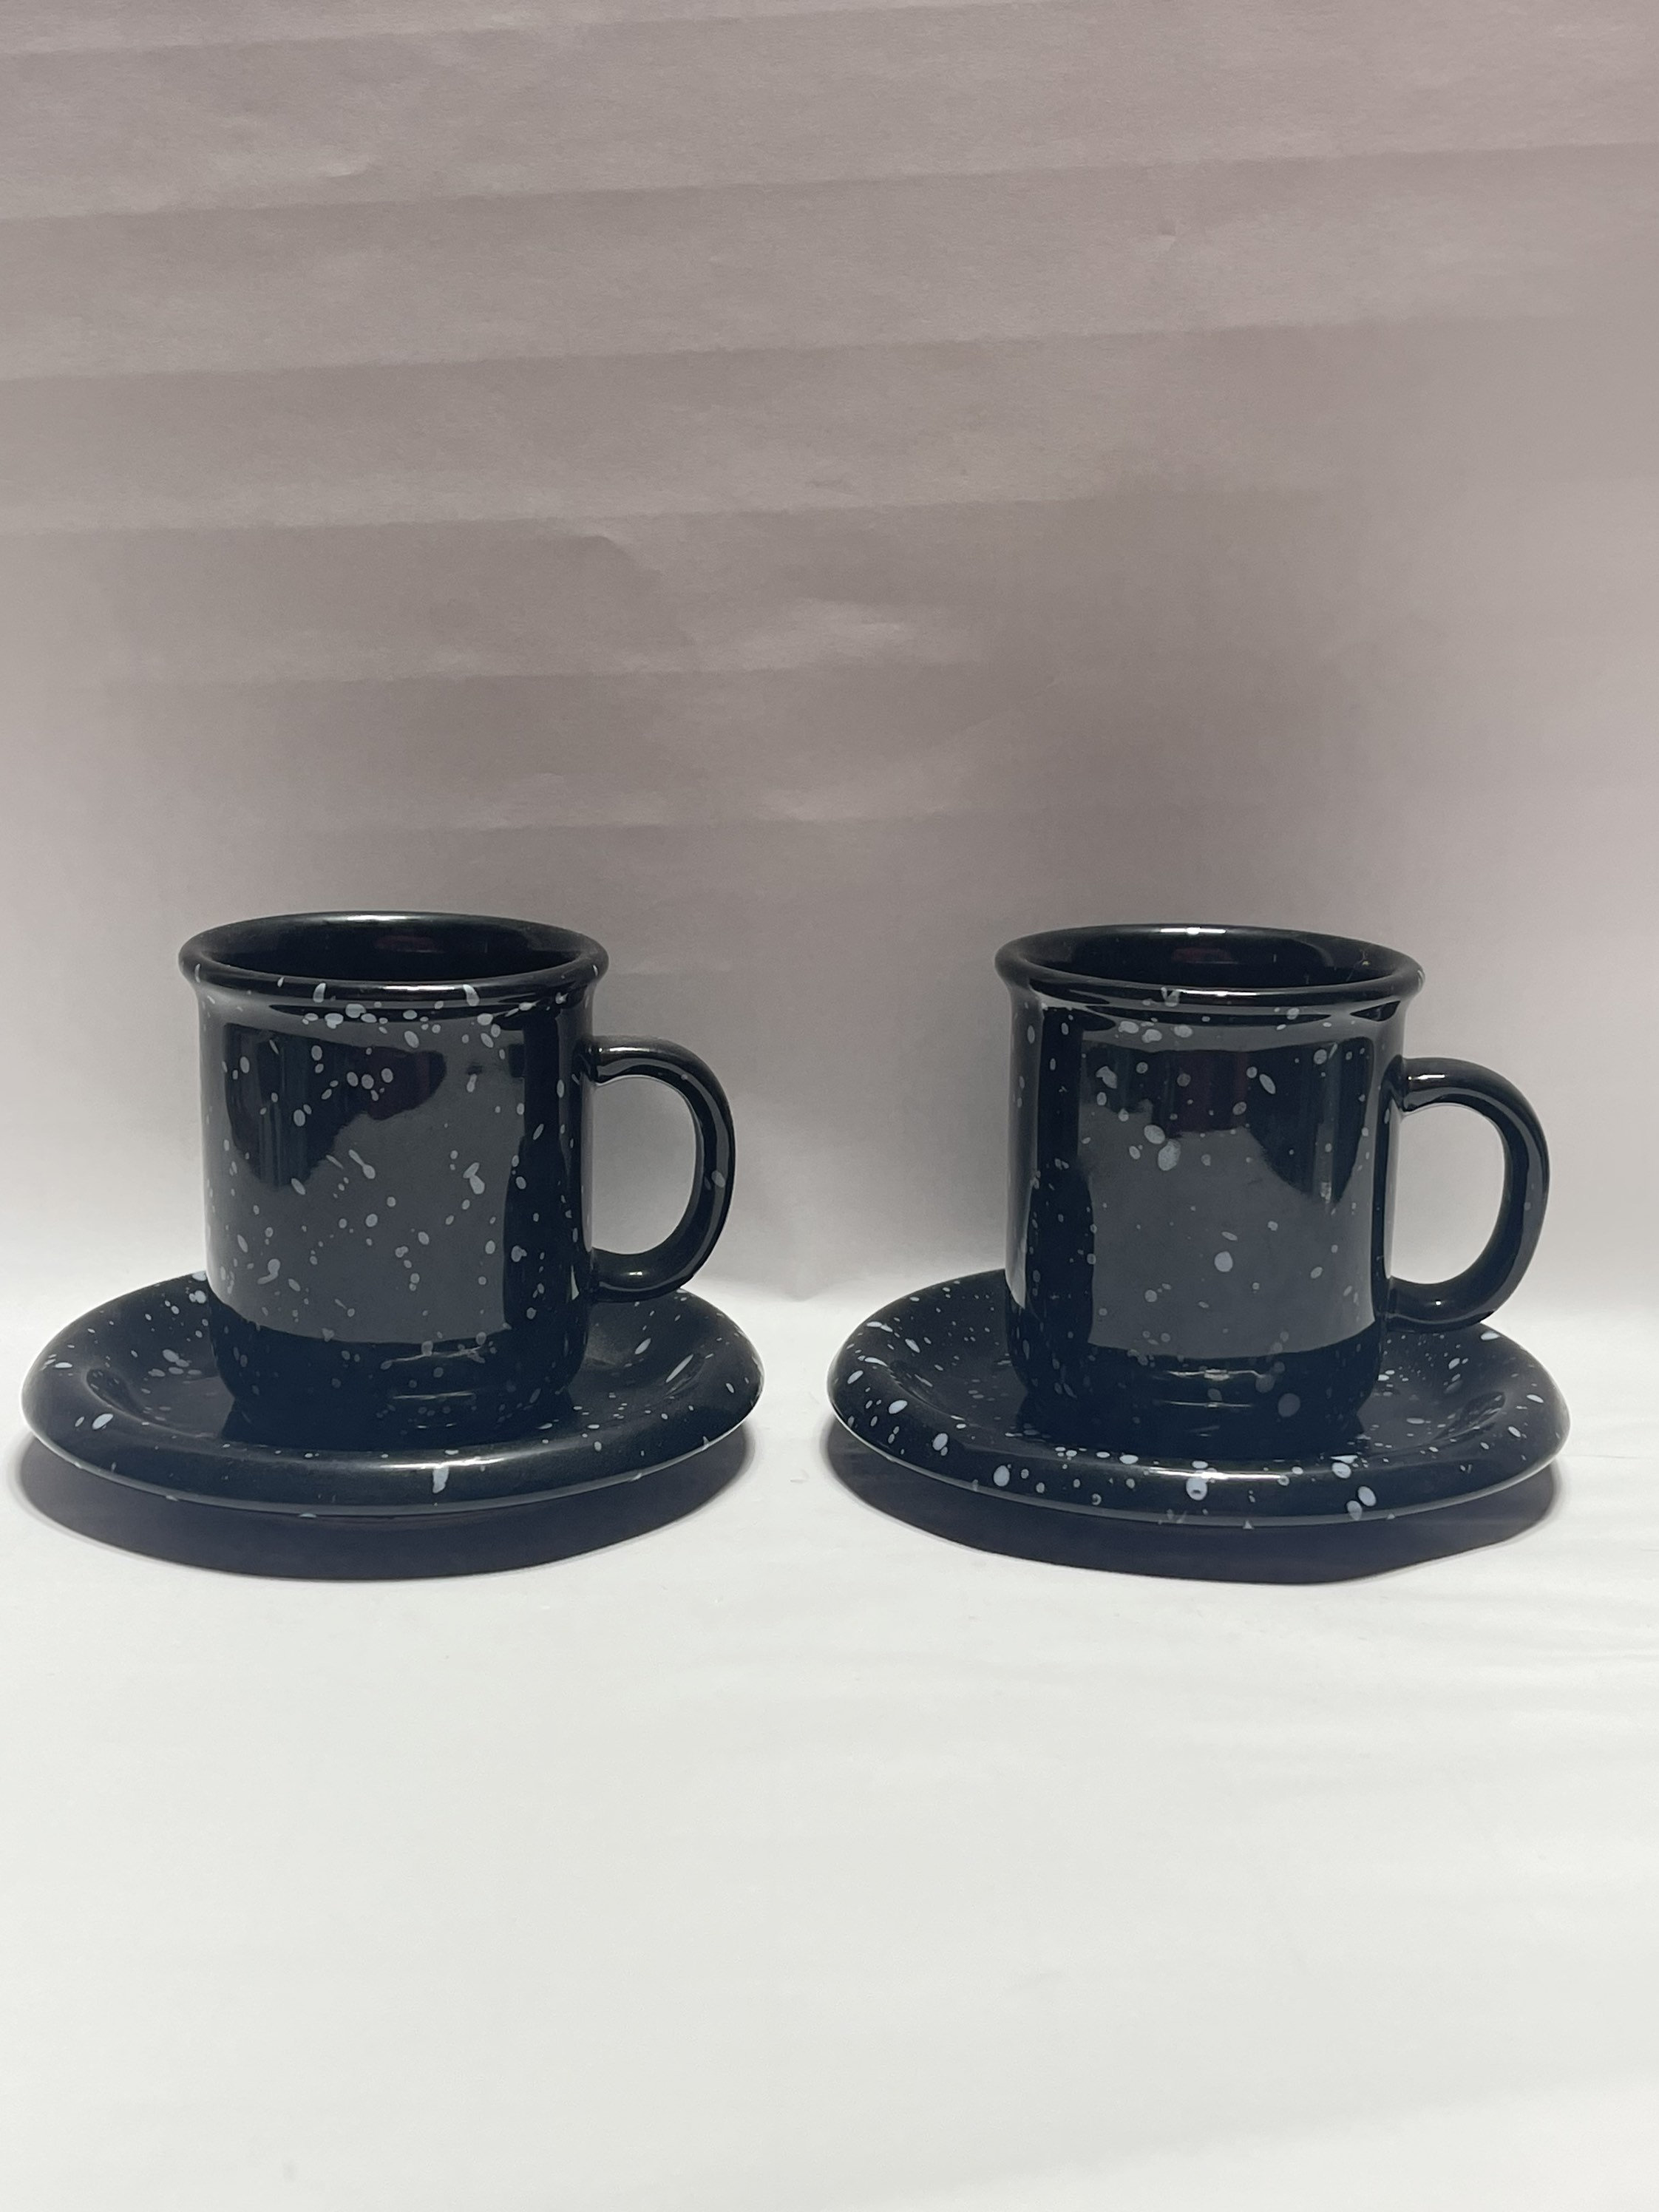 Retro plastic holder with Glass espresso cup inserts. set of 4